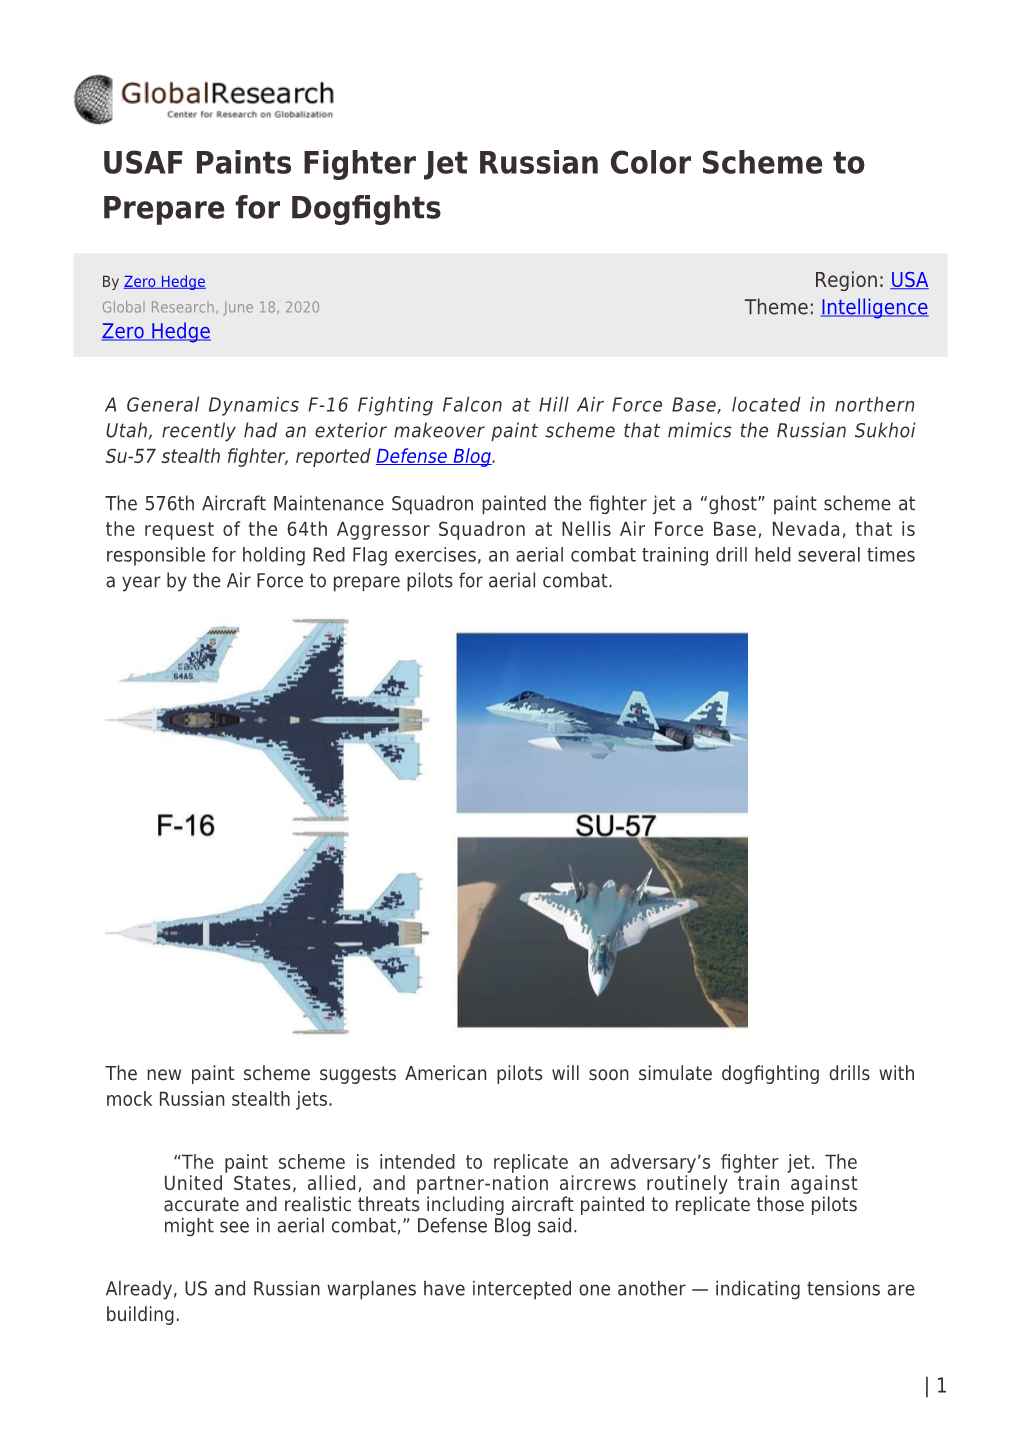 USAF Paints Fighter Jet Russian Color Scheme to Prepare for Dogﬁghts